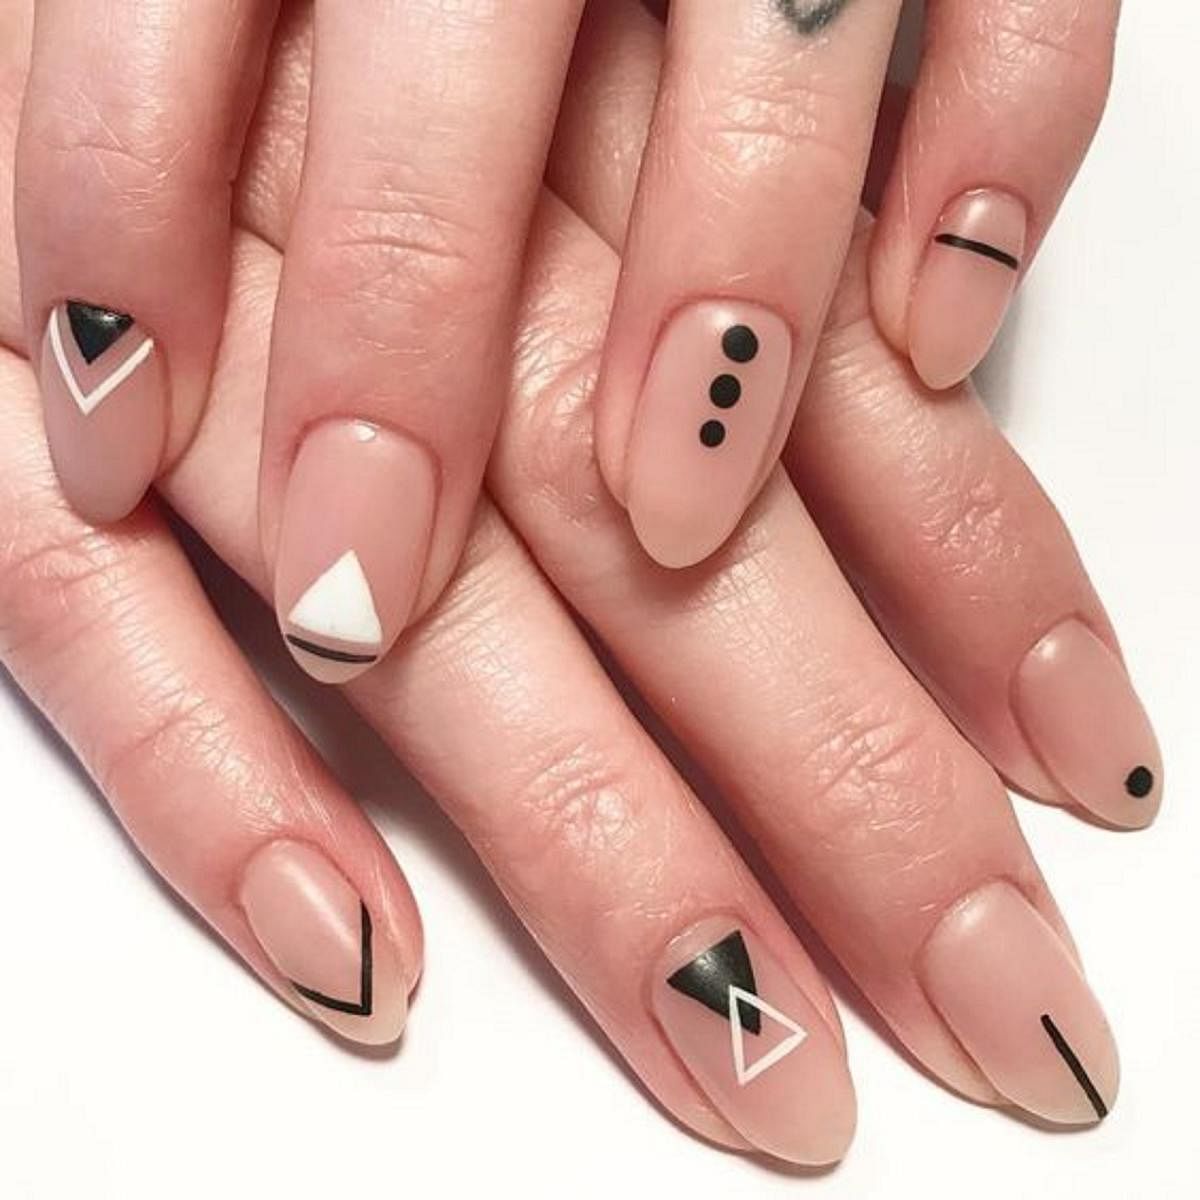 Check out six chic nail trends